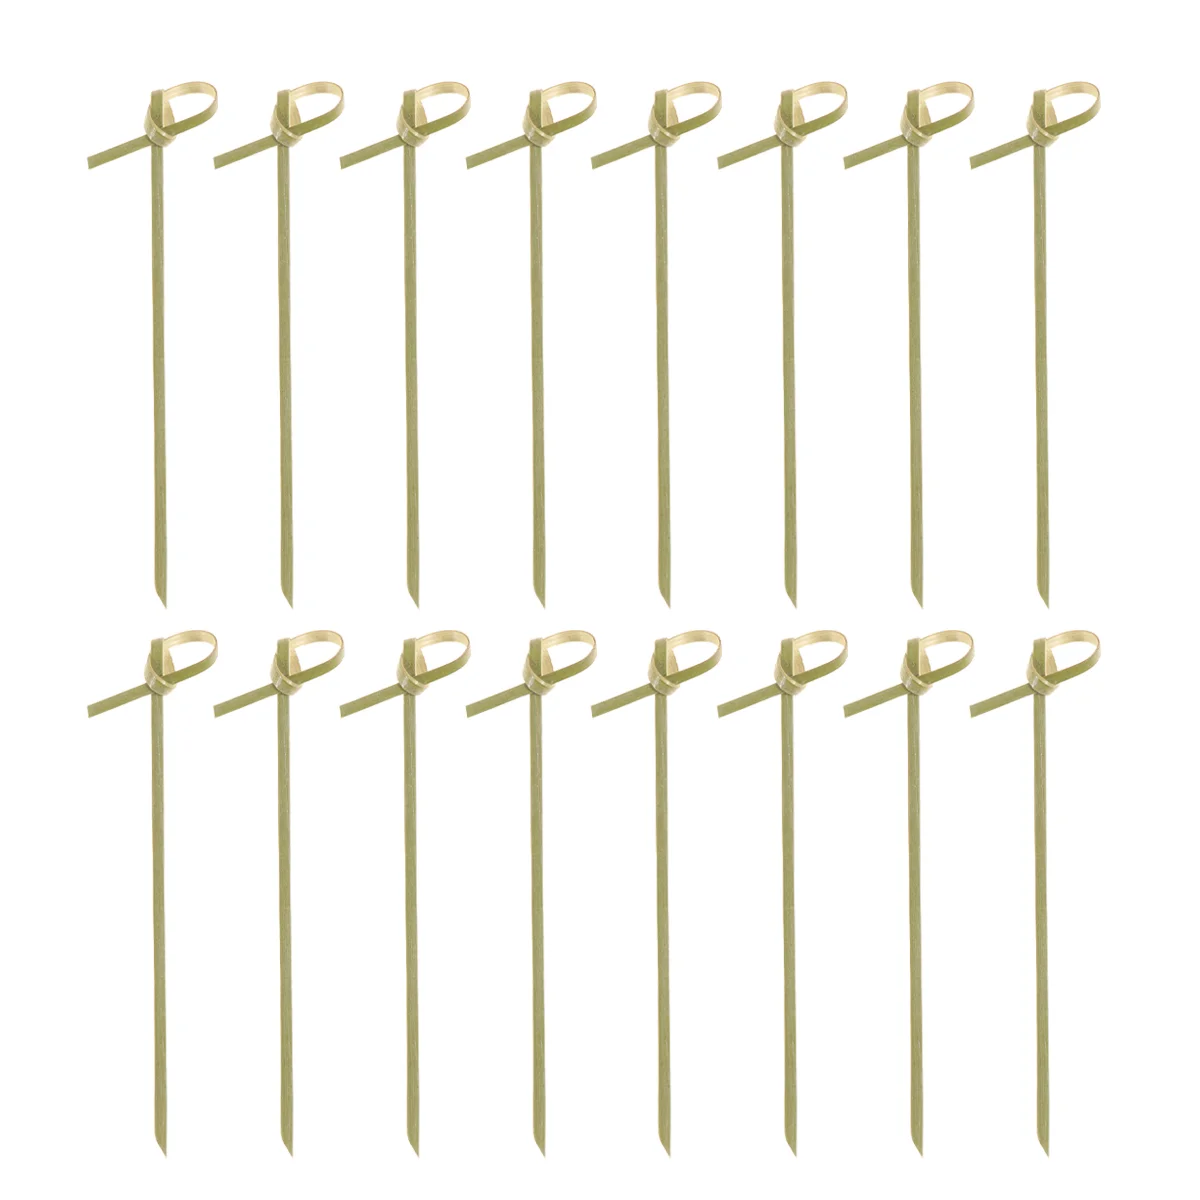 

Picks Toothpicks Cocktail Skewers Appetizer Knot Sticks Barbeque Sandwich Fruit Appetizers Martini Pick Wood Fancy Stirrers